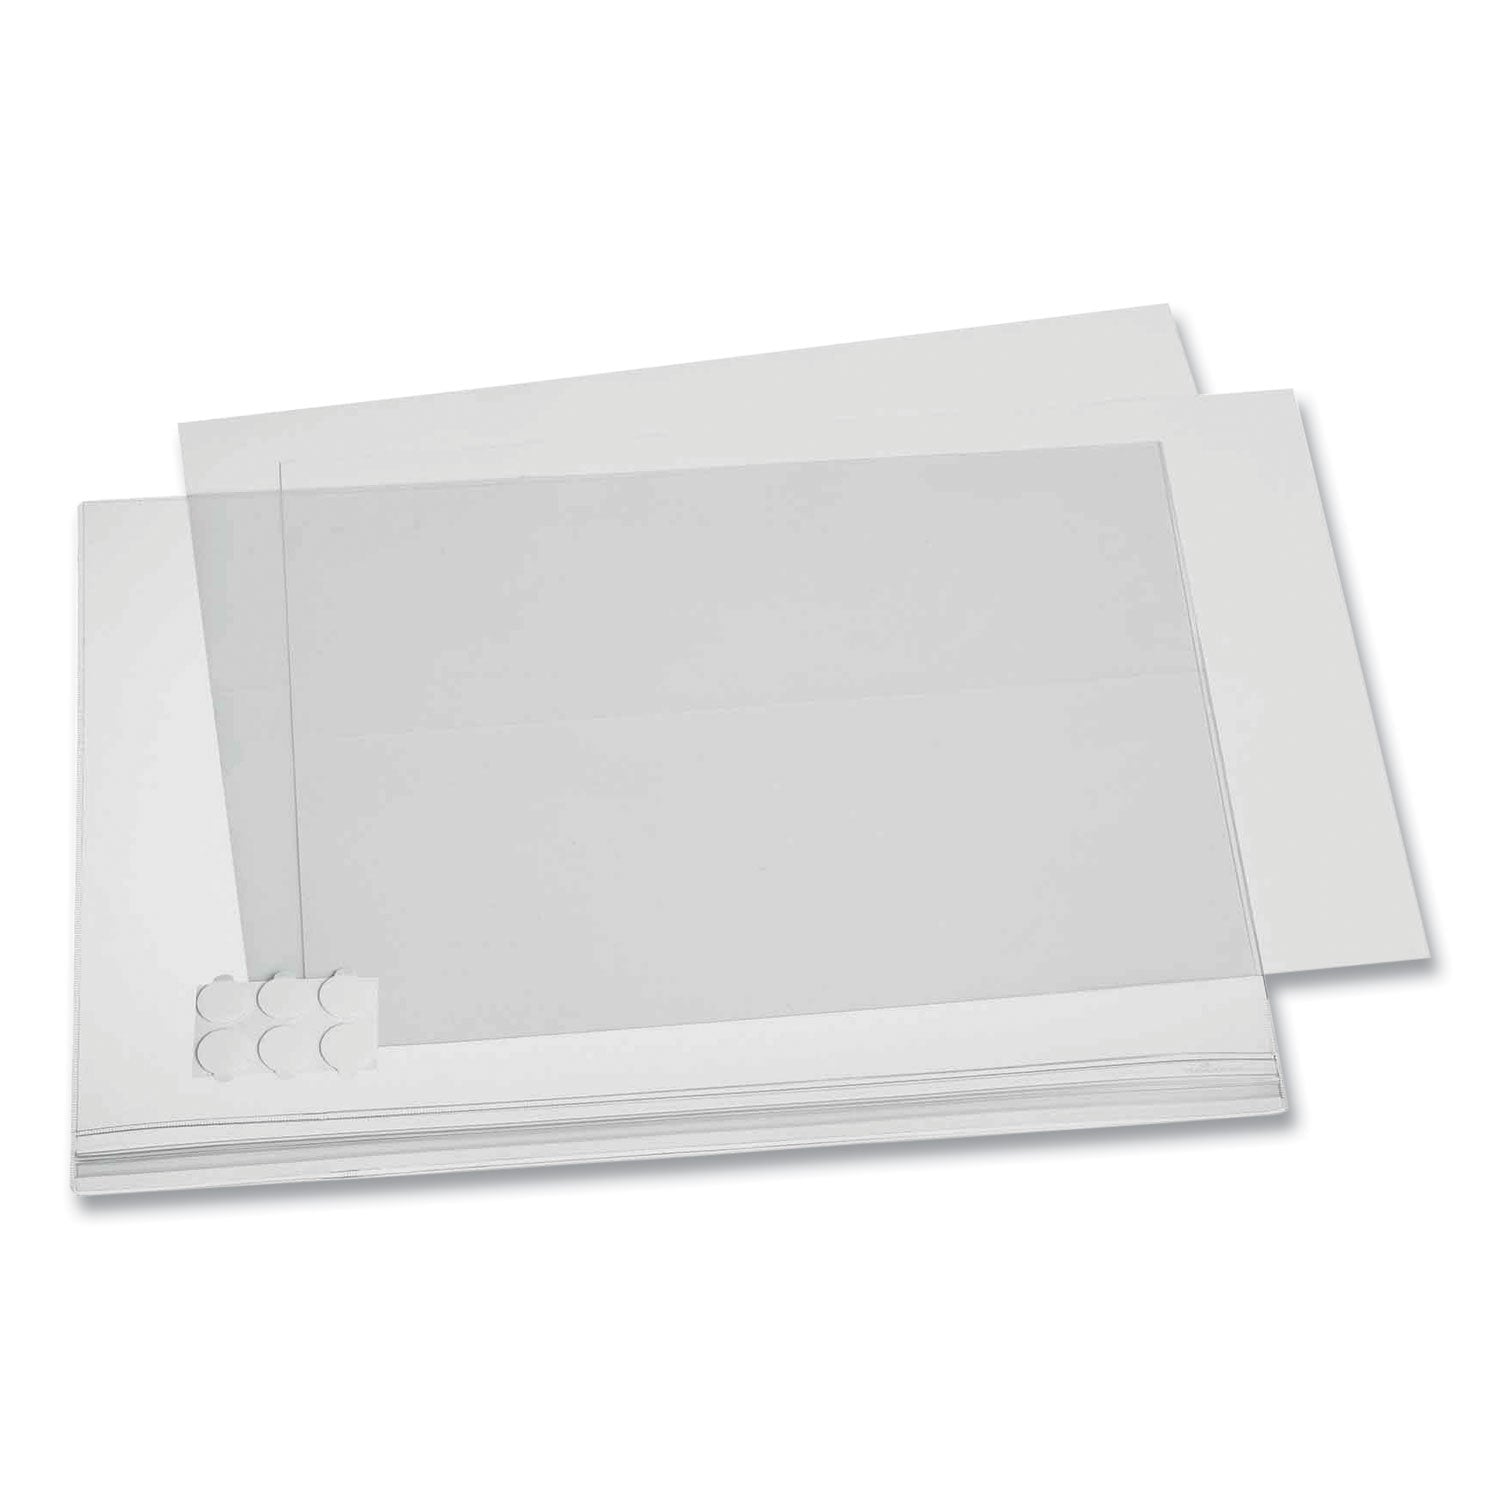 self-adhesive-water-resistant-sign-holder-11-x-17-clear-frame-5-pack_dbl501719 - 1